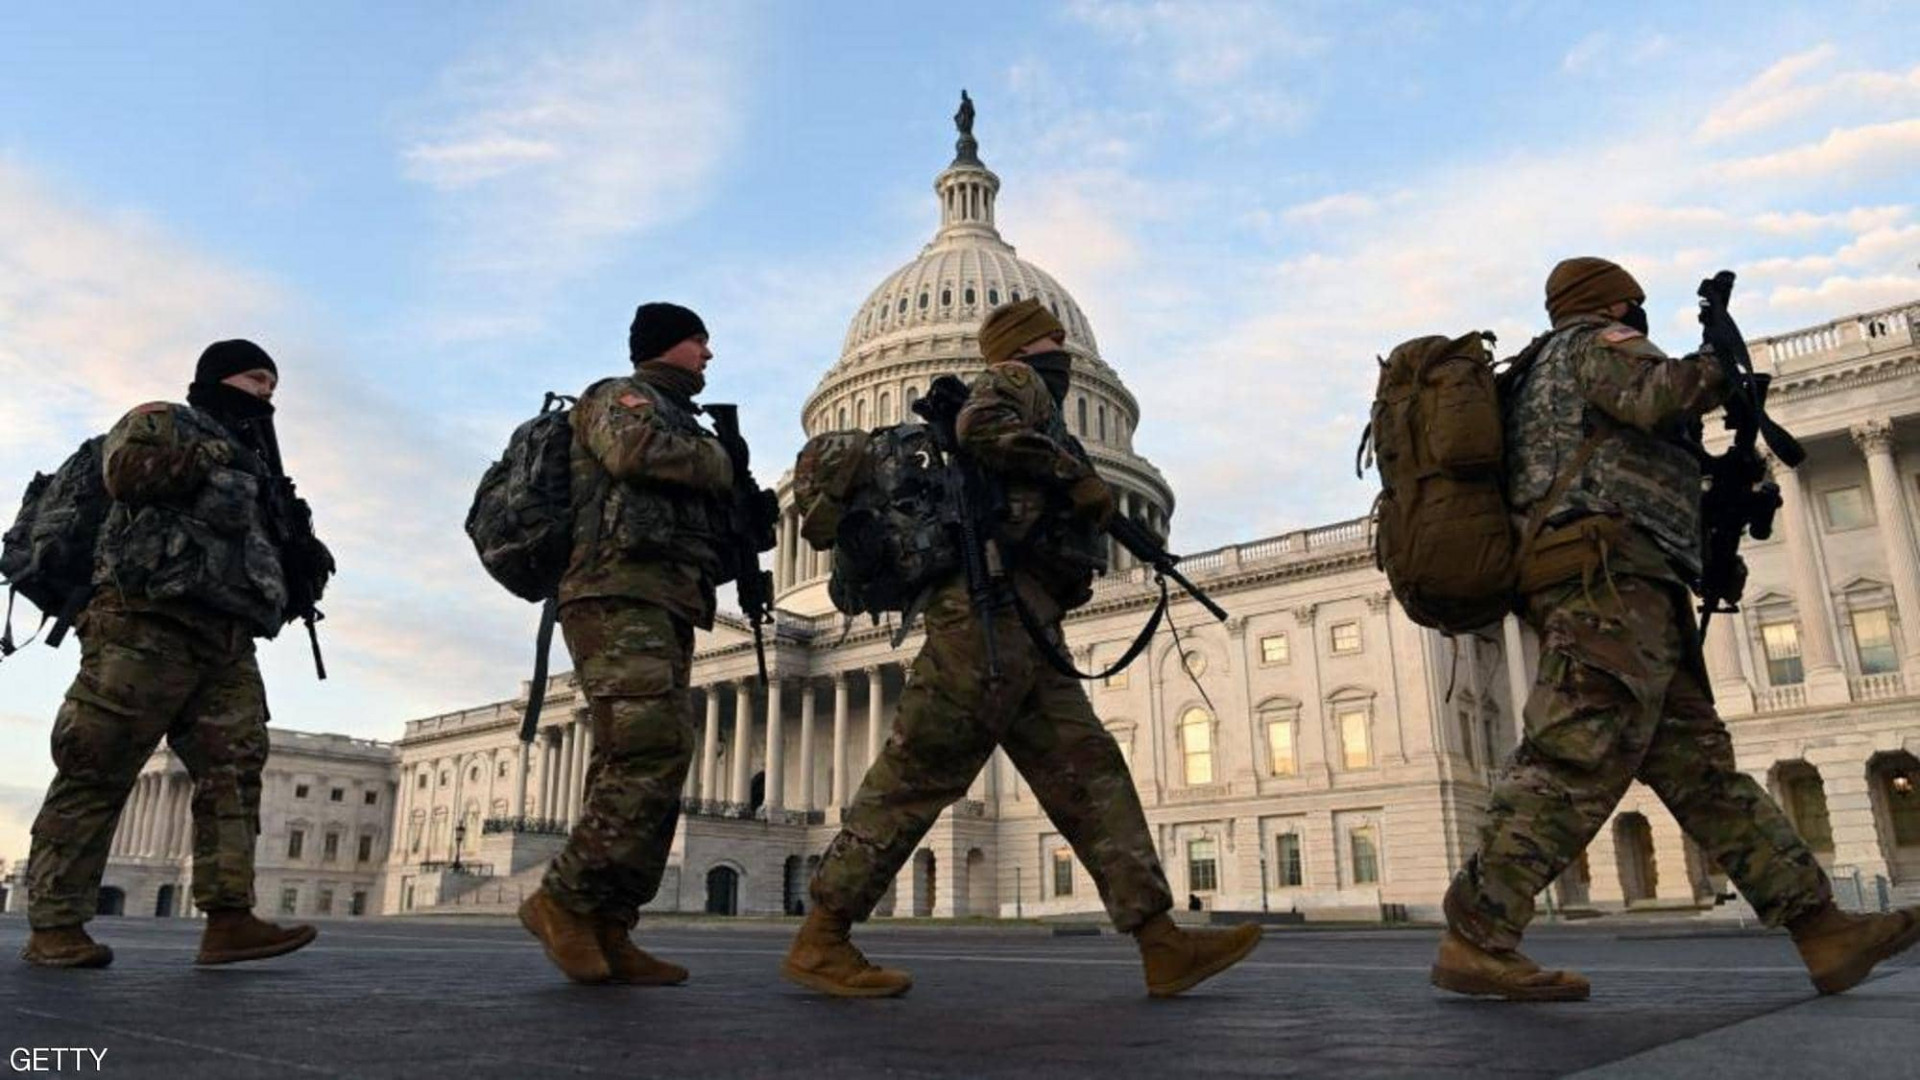 Capitol police investigating bomb threat near Library of Congress, buildings evacuated